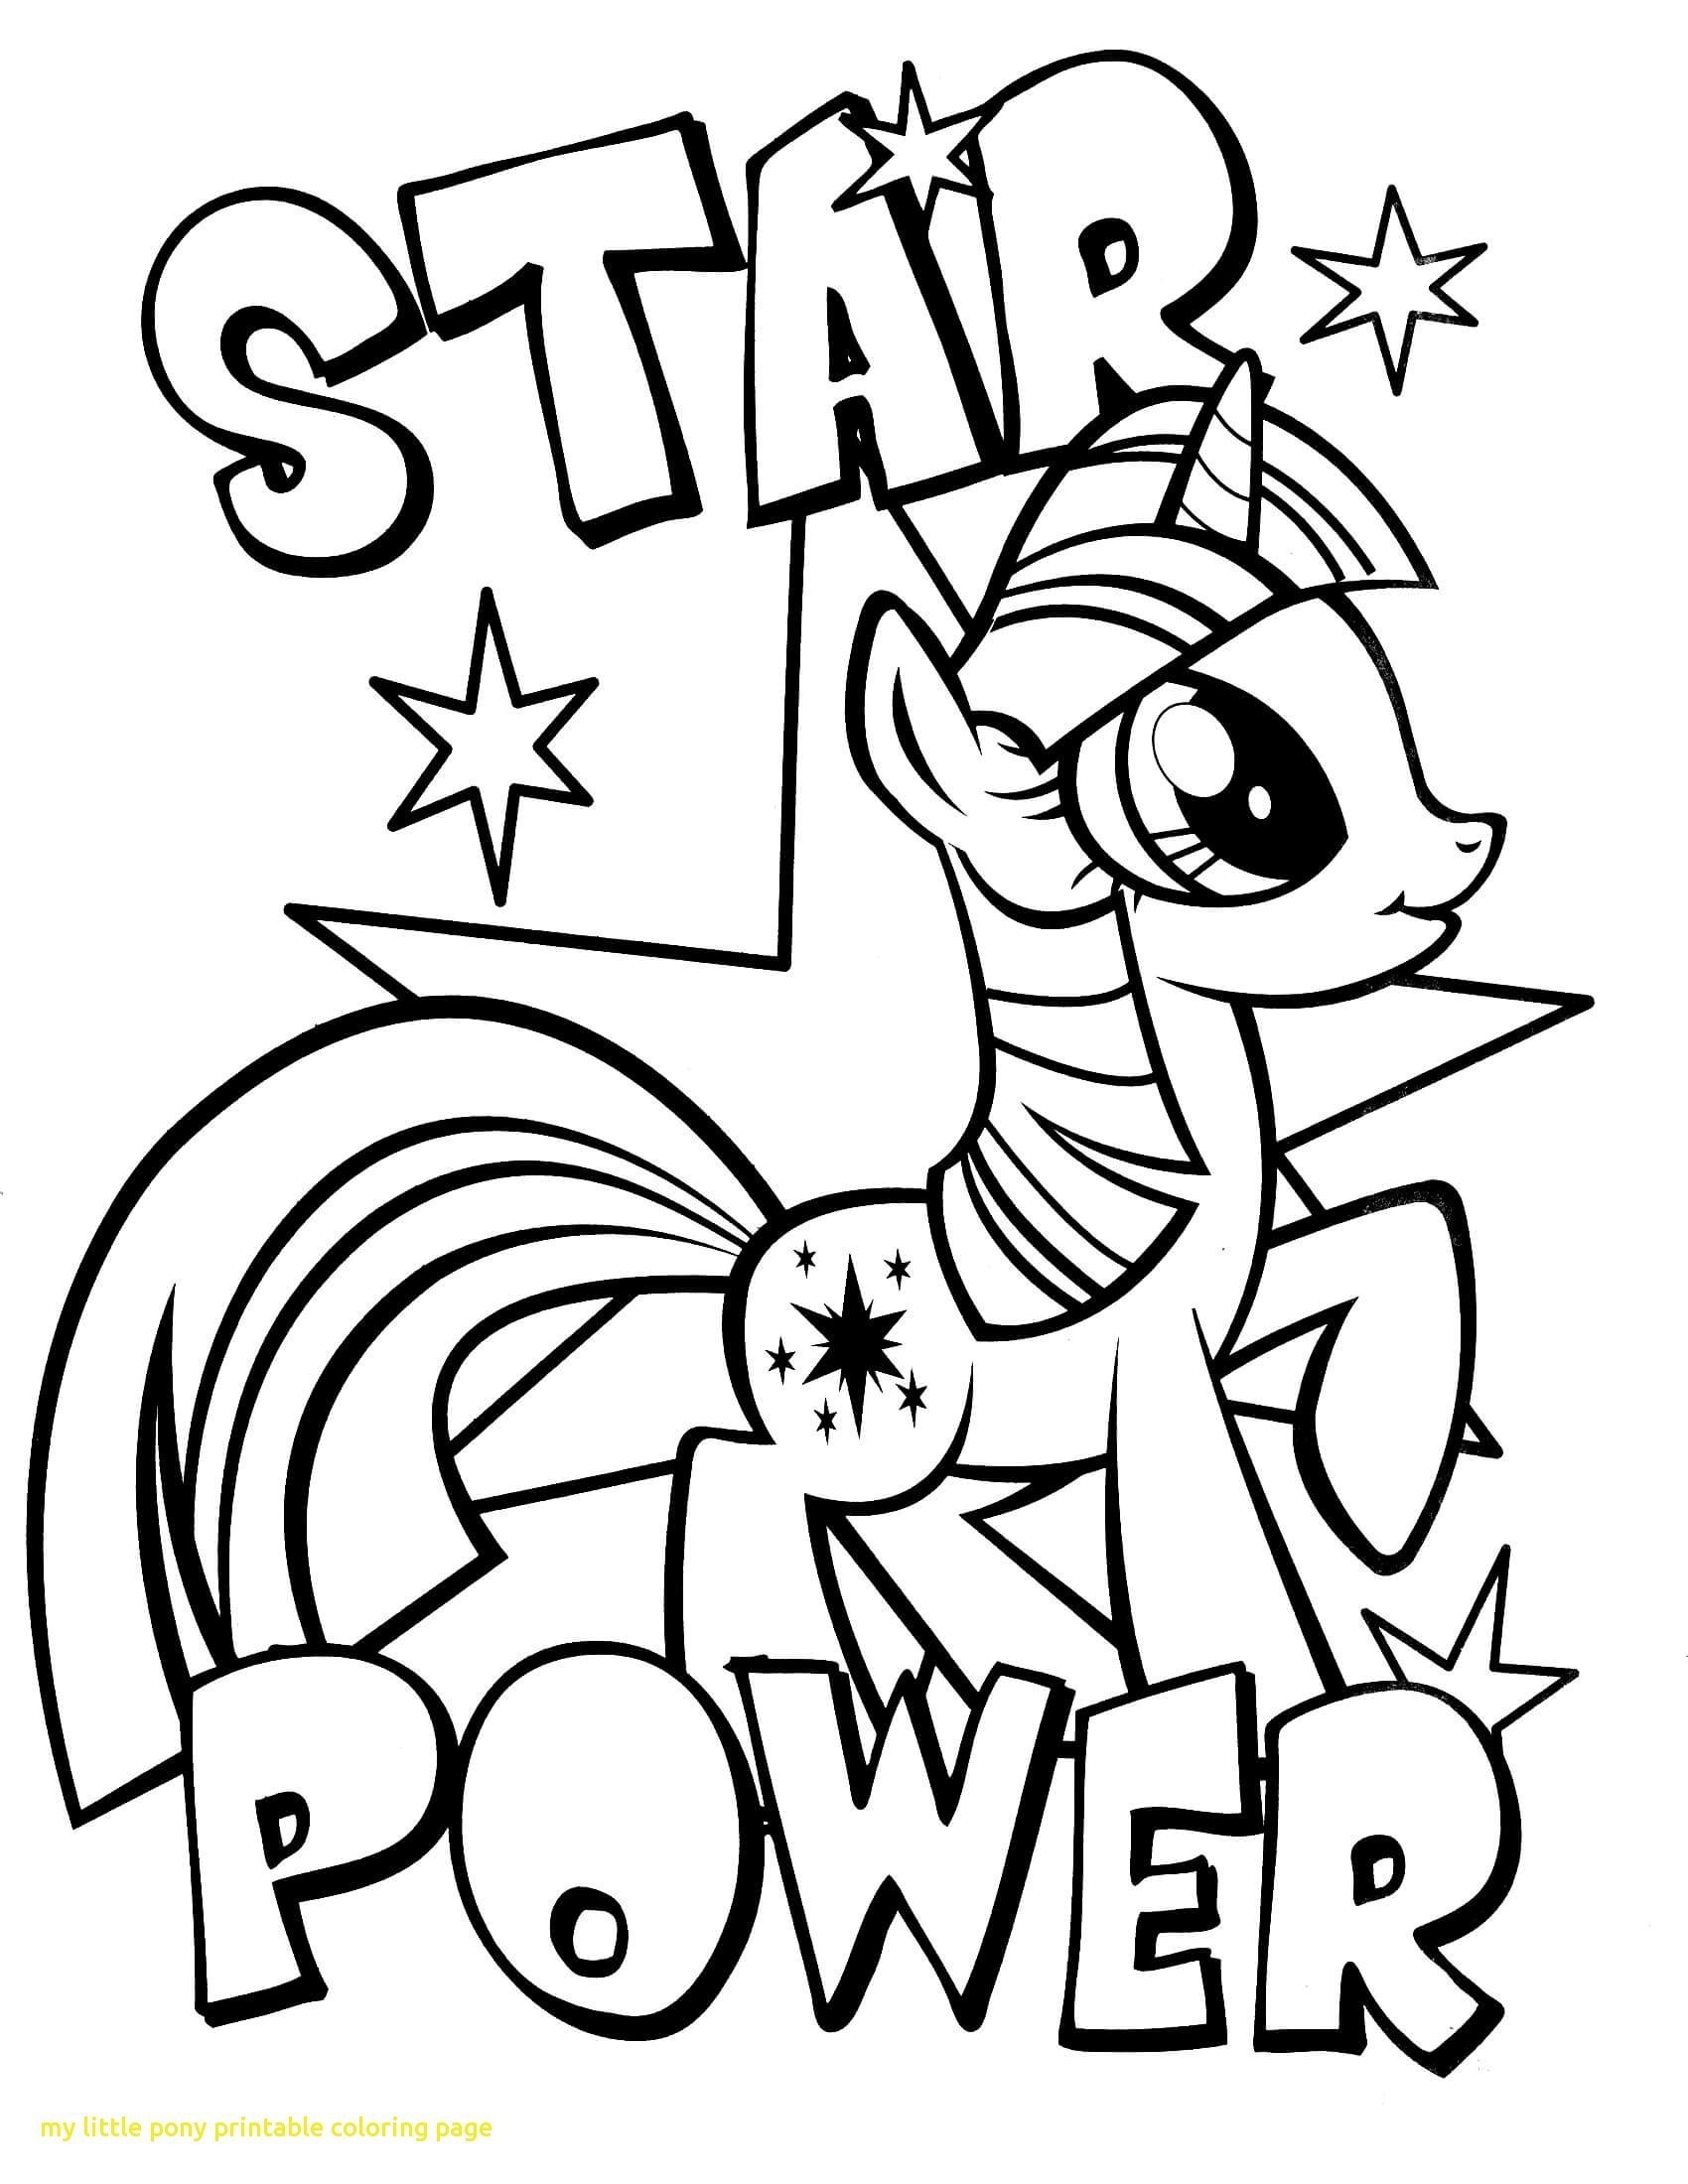 My Little Pony Coloring Page Fresh My Little Pony Color Pages Fresh My Little Pony Coloring